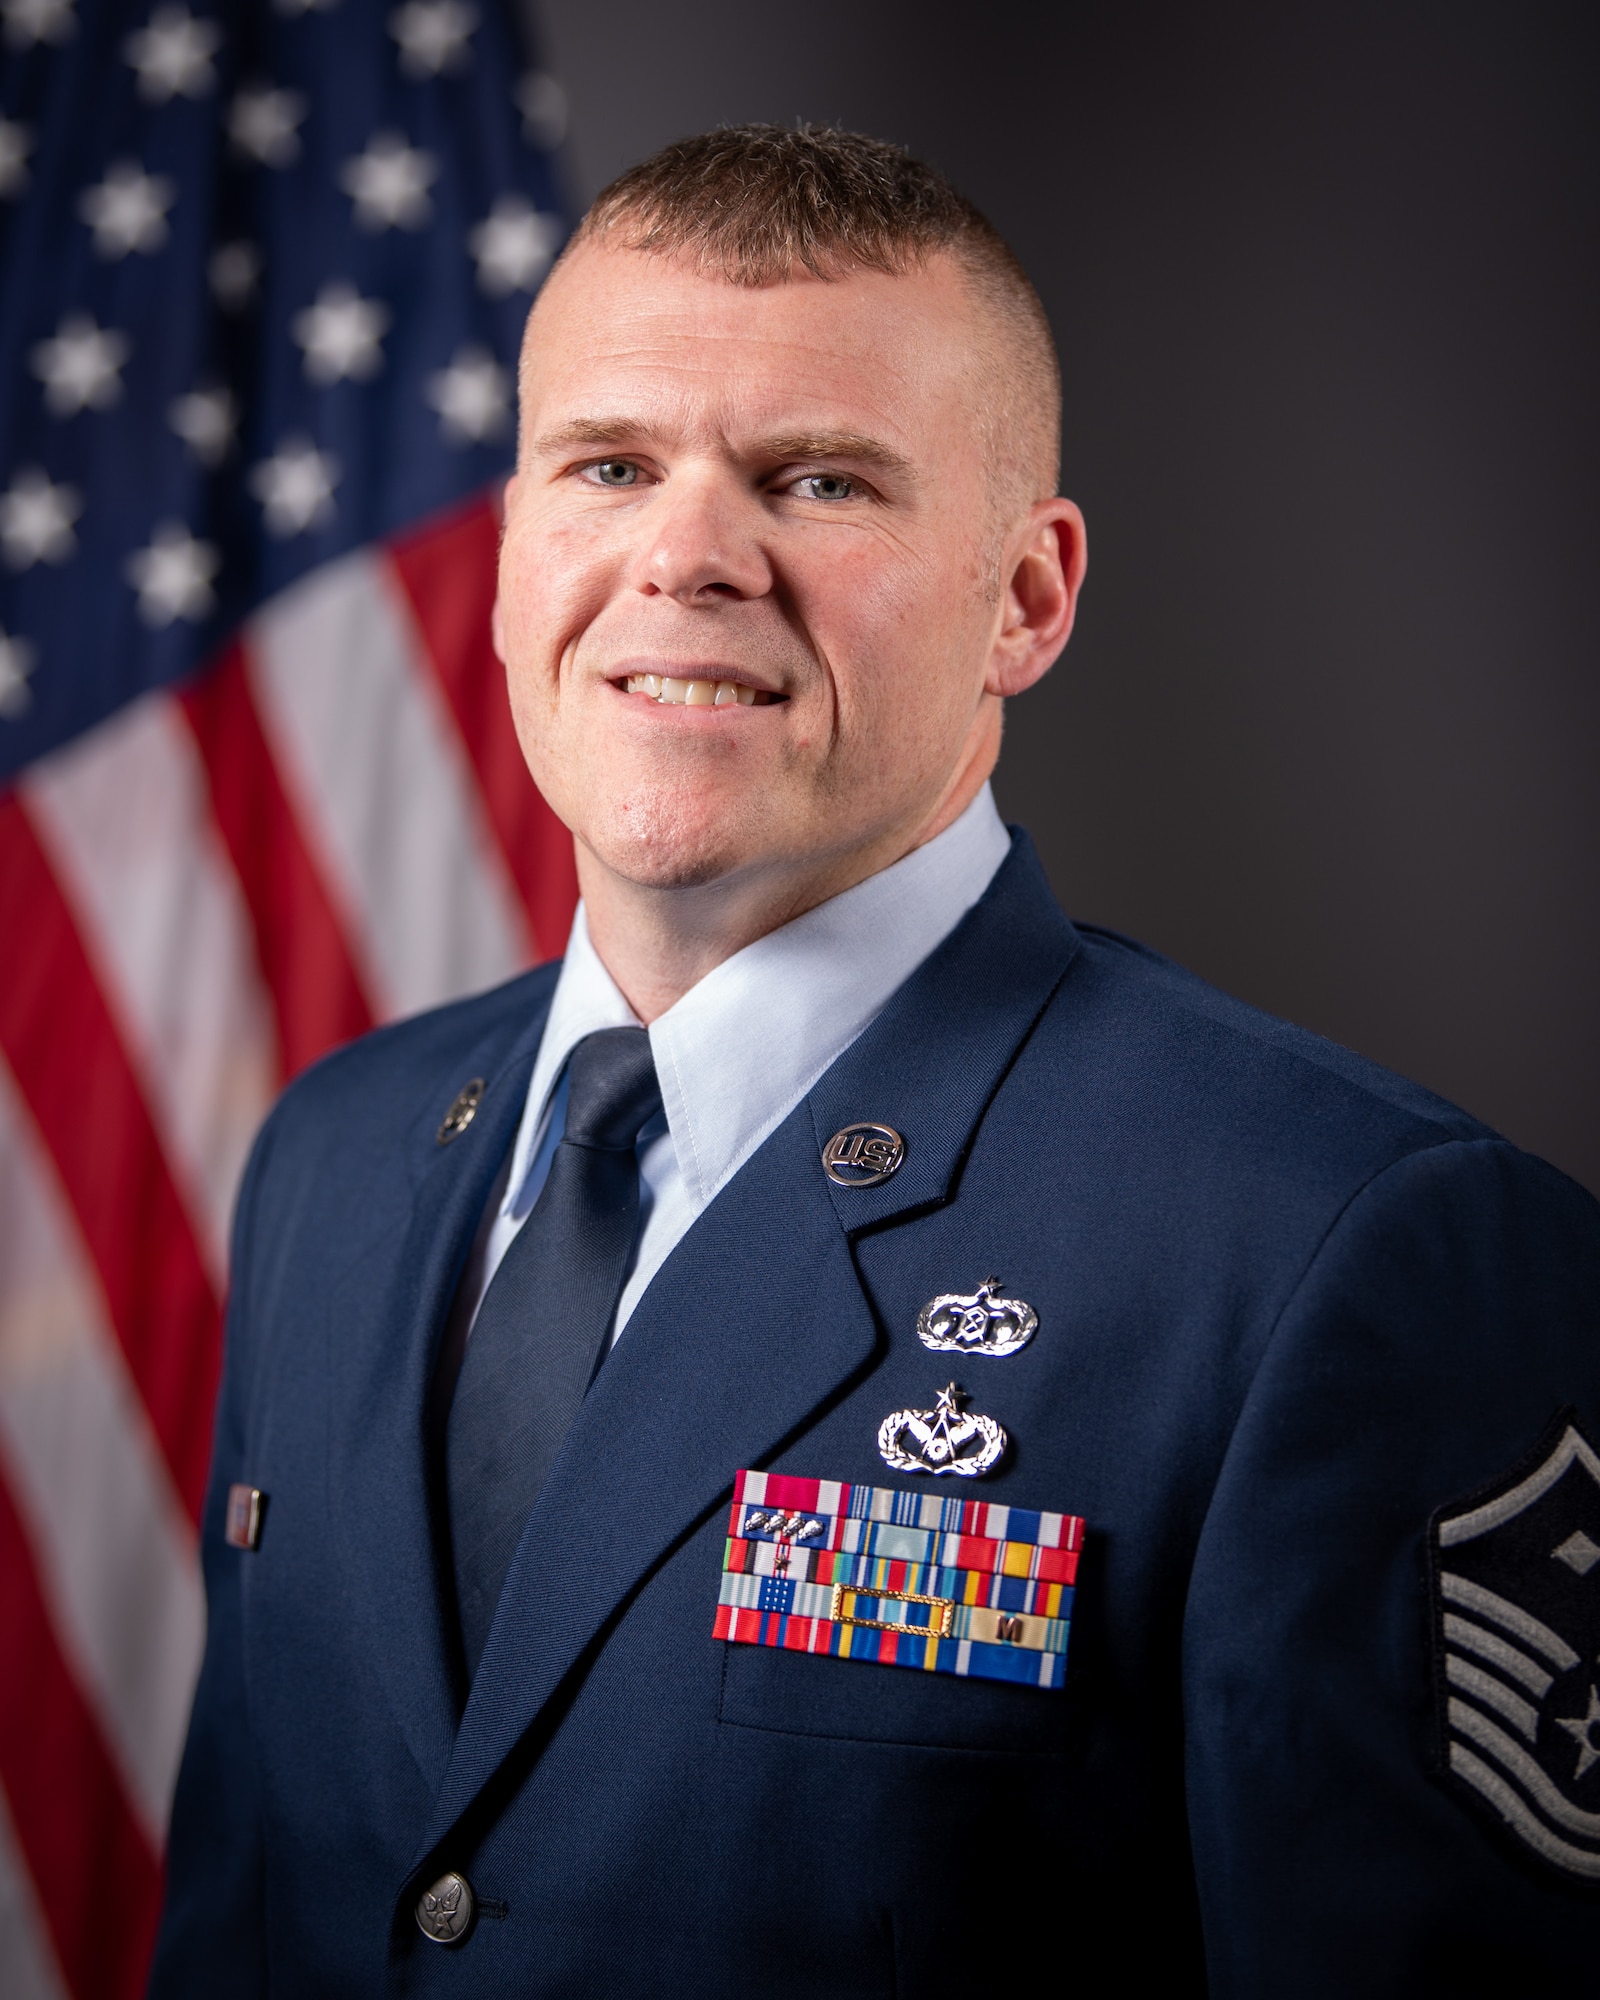 Master Sgt. Joshua Thompson of the 123rd Aircraft Maintenance Squadron has been selected as the Kentucky Air National Guard’s 2022 First Sergeant of the Year. Thompson amassed more than 500 hours as an instructor at Maintenance University, leading 325 service members through 12 days of training events and increasing the squadron’s overall aircraft proficiency. (U.S. Air National Guard photo by Master Sgt. Phil Speck)